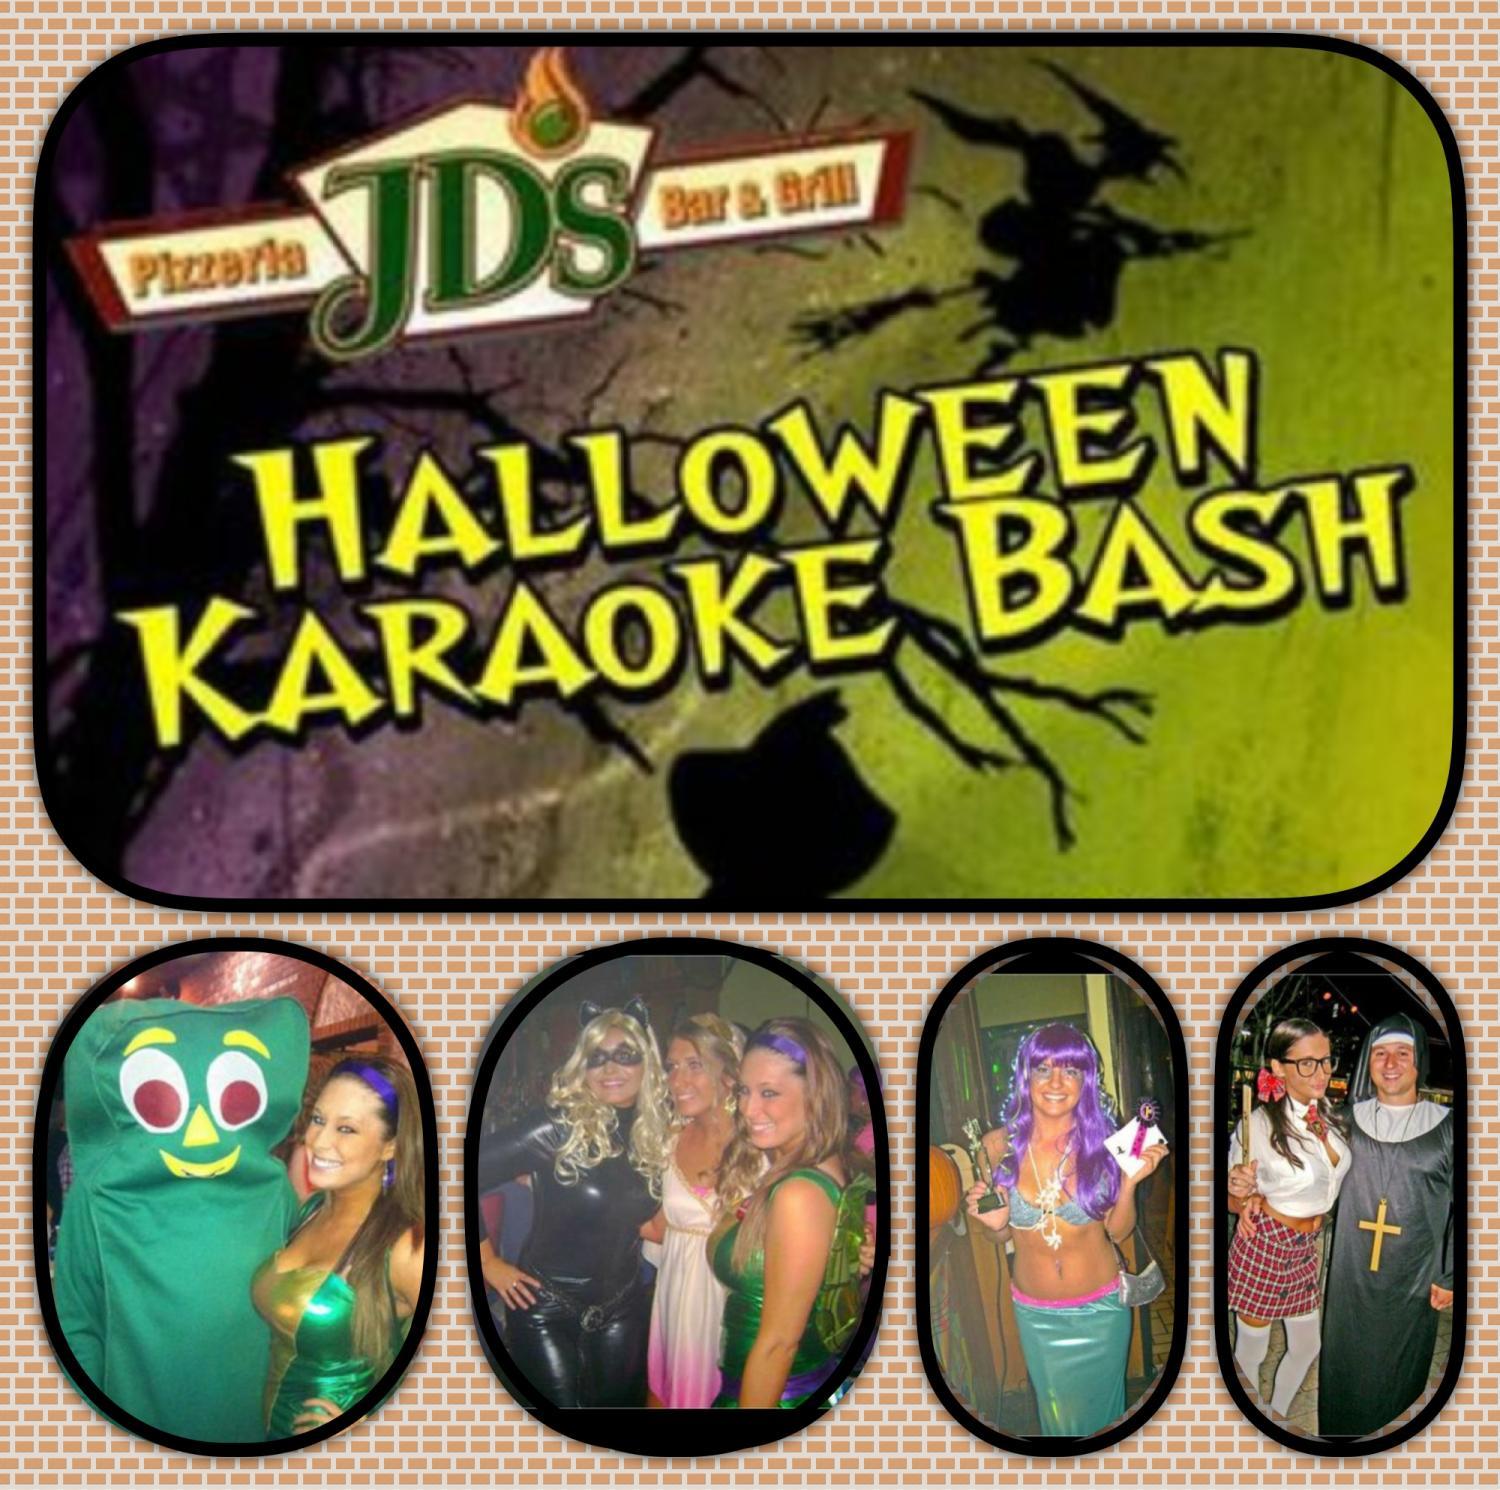 JD’s Annual Halloween Party
Fri Oct 28, 7:00 PM - Fri Oct 28, 11:00 PM
in 8 days